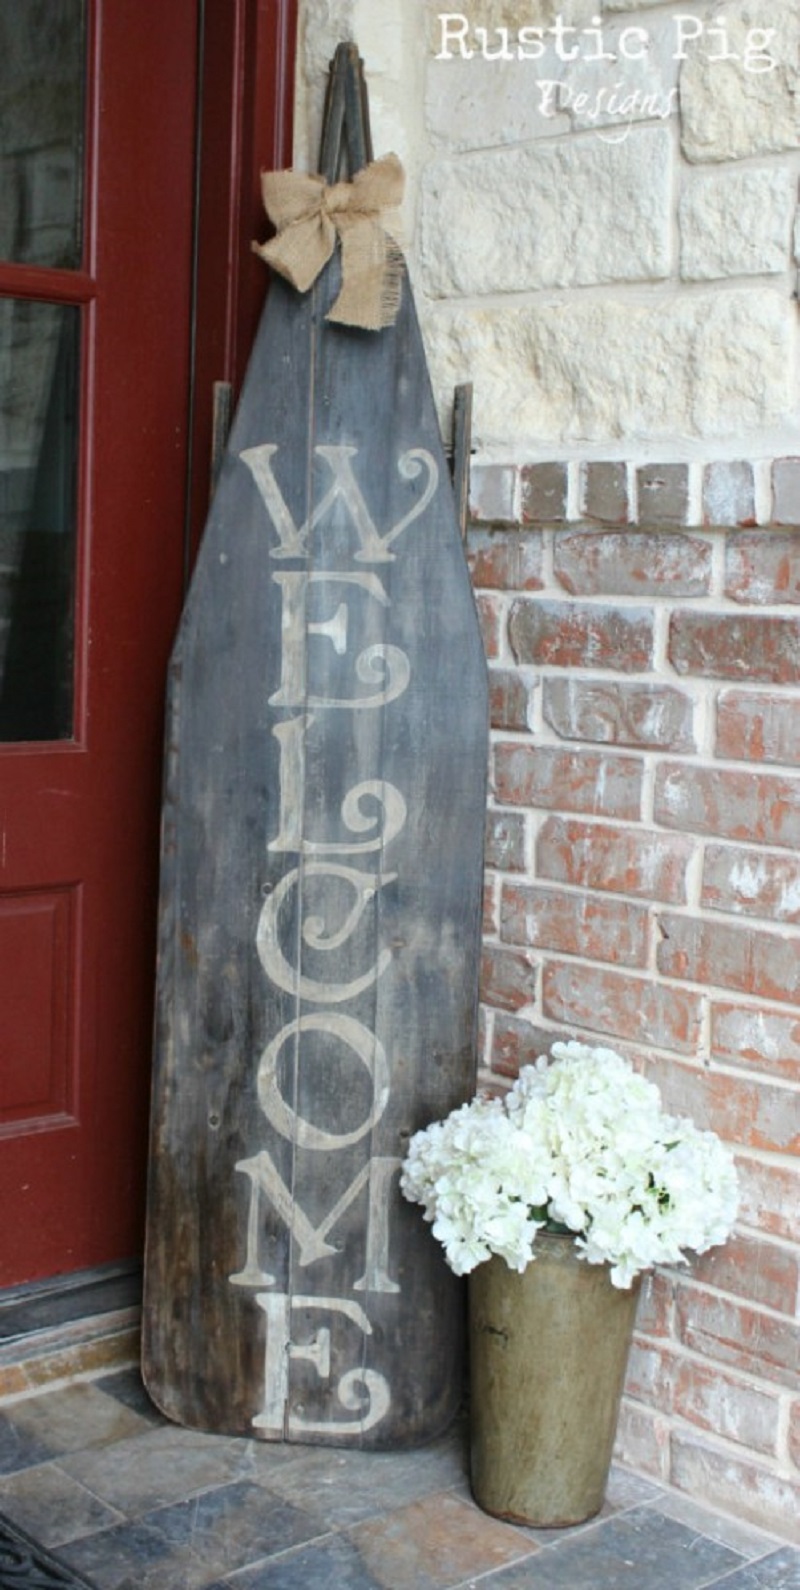 Old wooden ironing board welcome sign